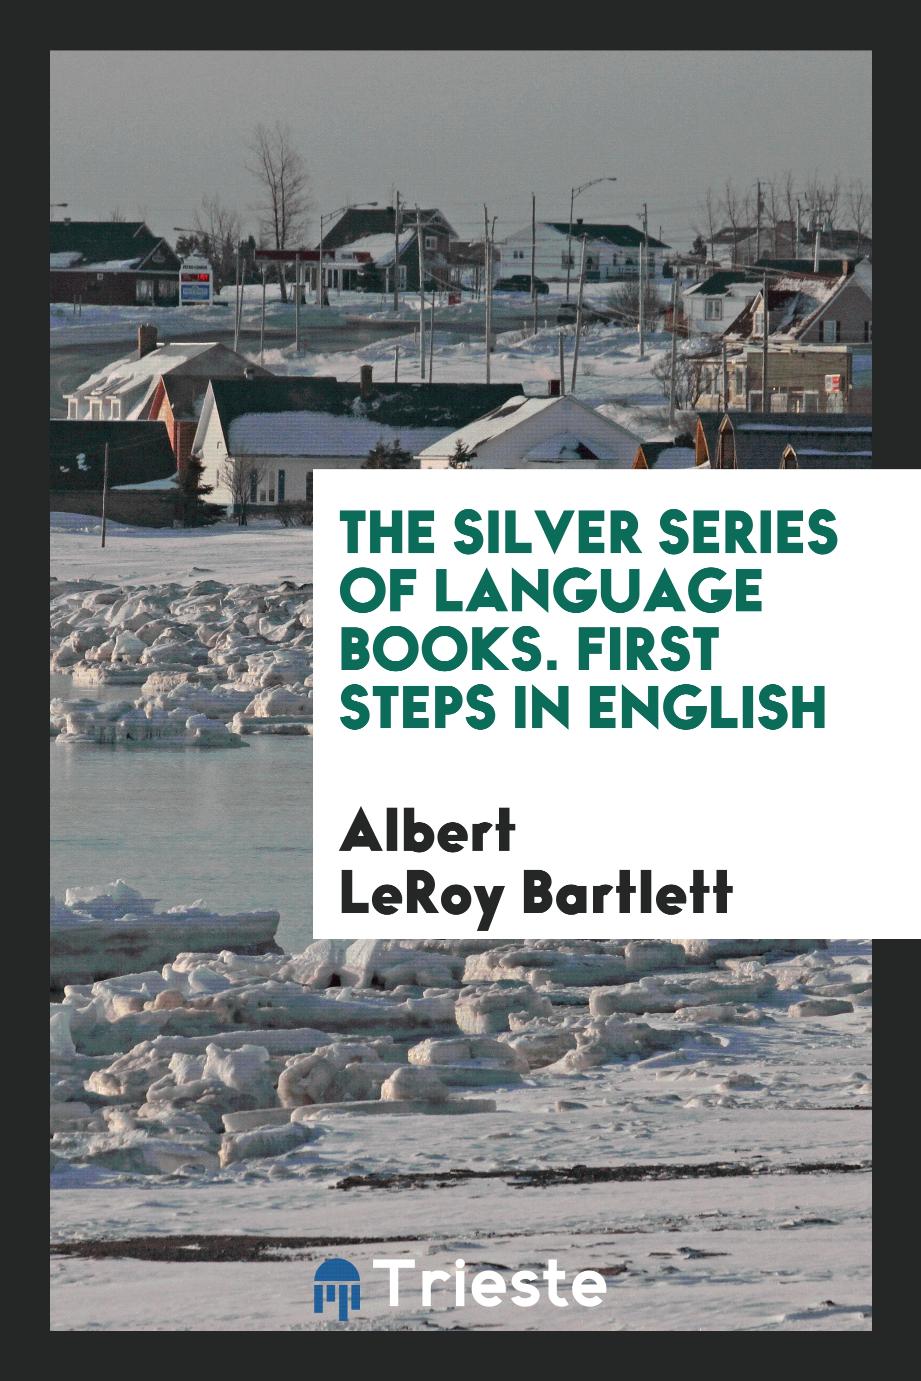 The Silver Series of Language Books. First Steps in English